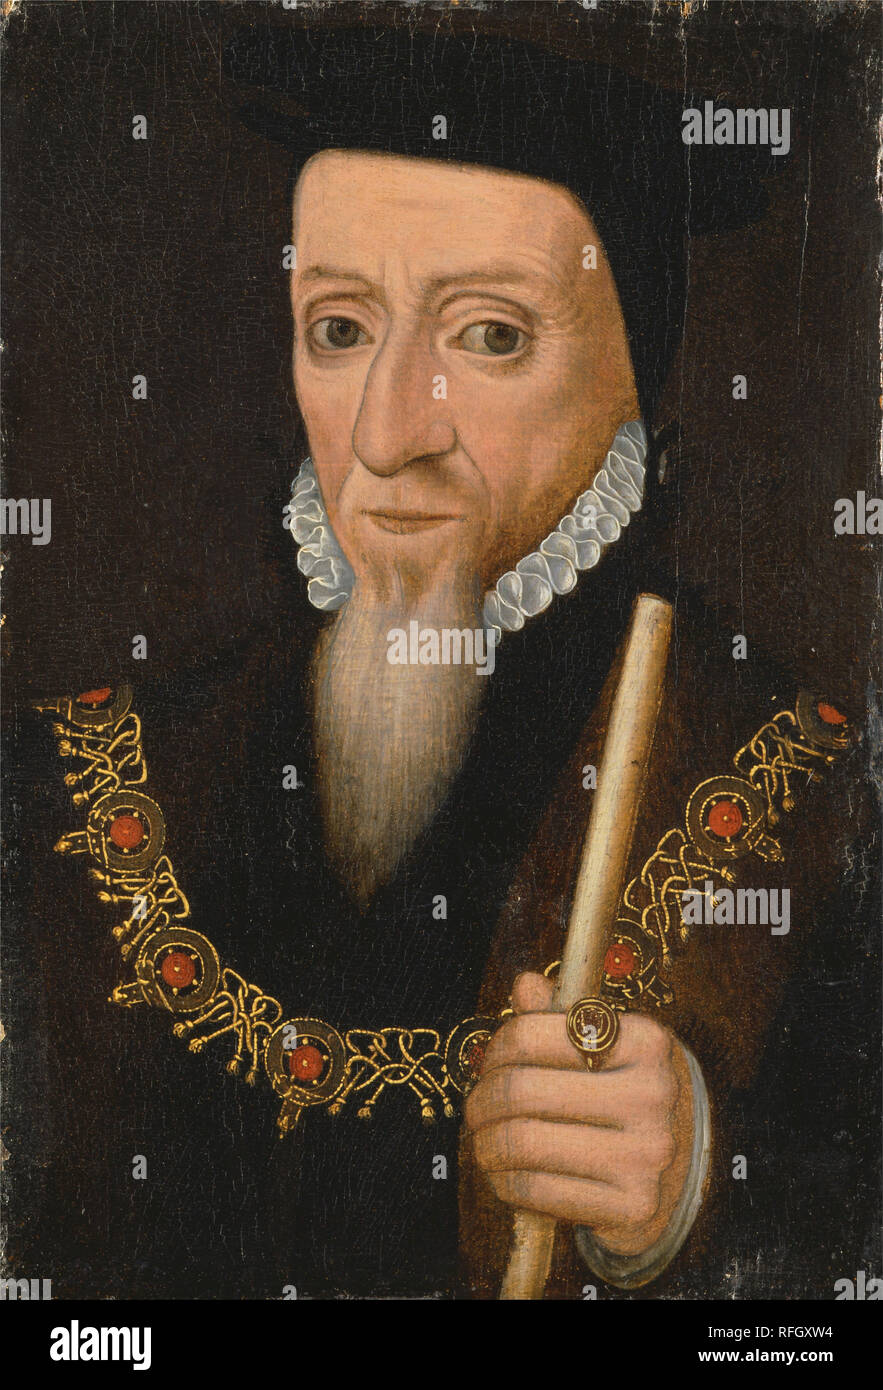 William Powlett, 1st Marquess of Winchester, K.G. Date/Period: Between 1555 and 1575. Painting. Oil on panel. Height: 359 mm (14.13 in); Width: 248 mm (9.76 in). Author: UNKNOWN ARTIST. Stock Photo